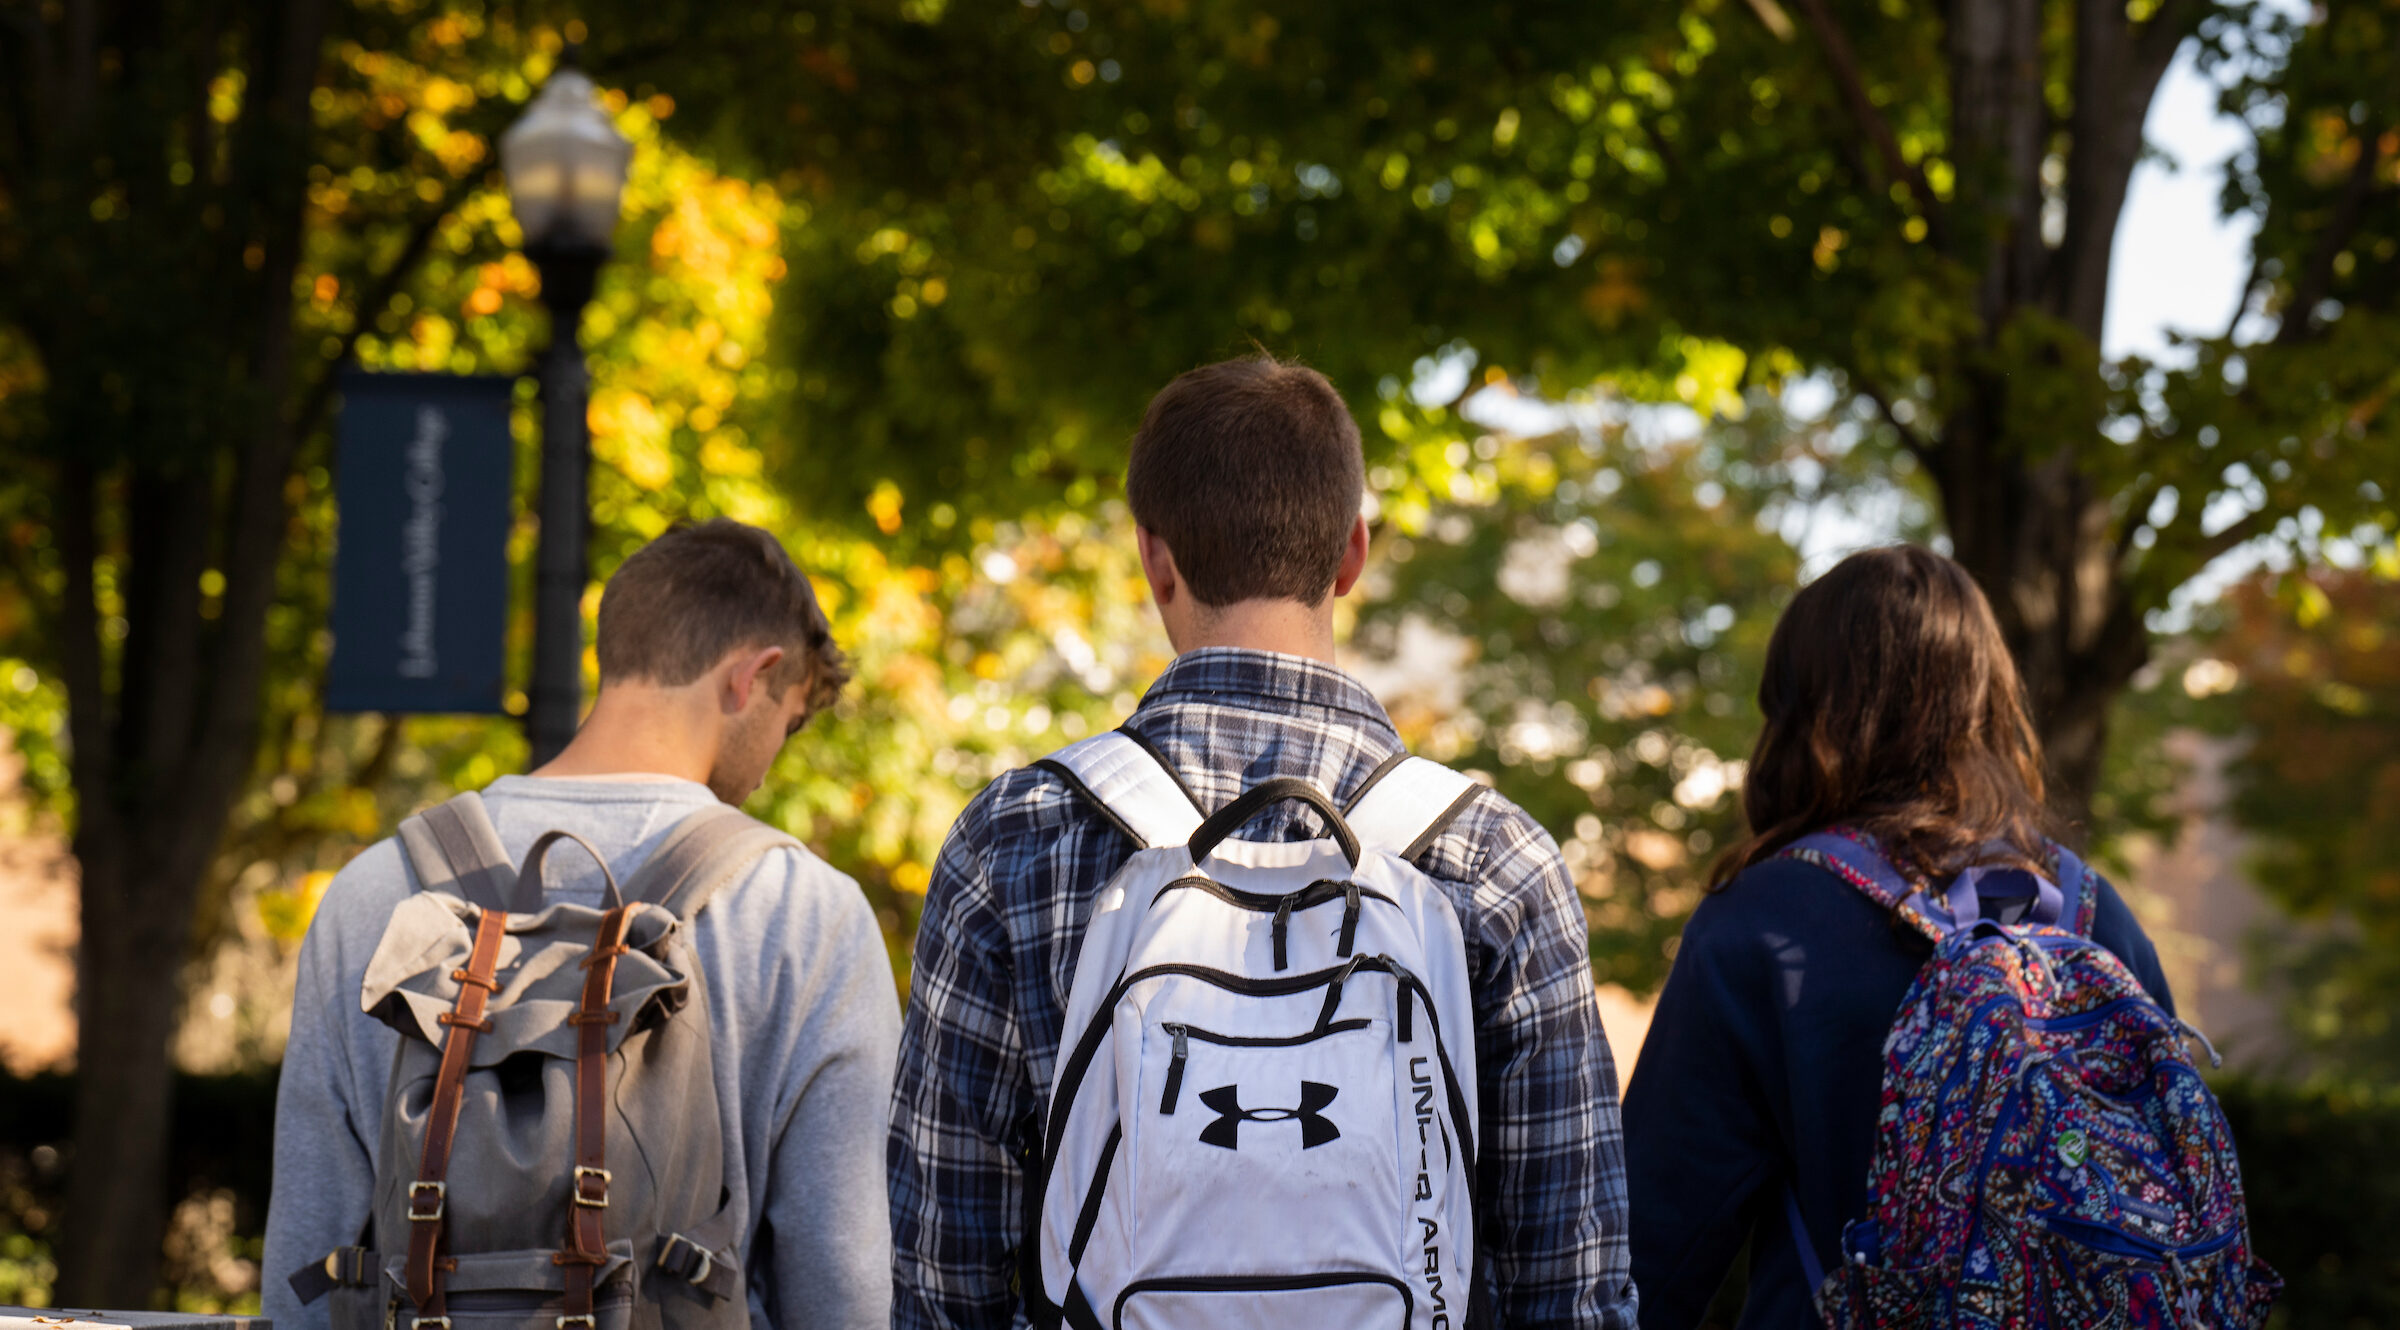 Students walk on campus with backpacks